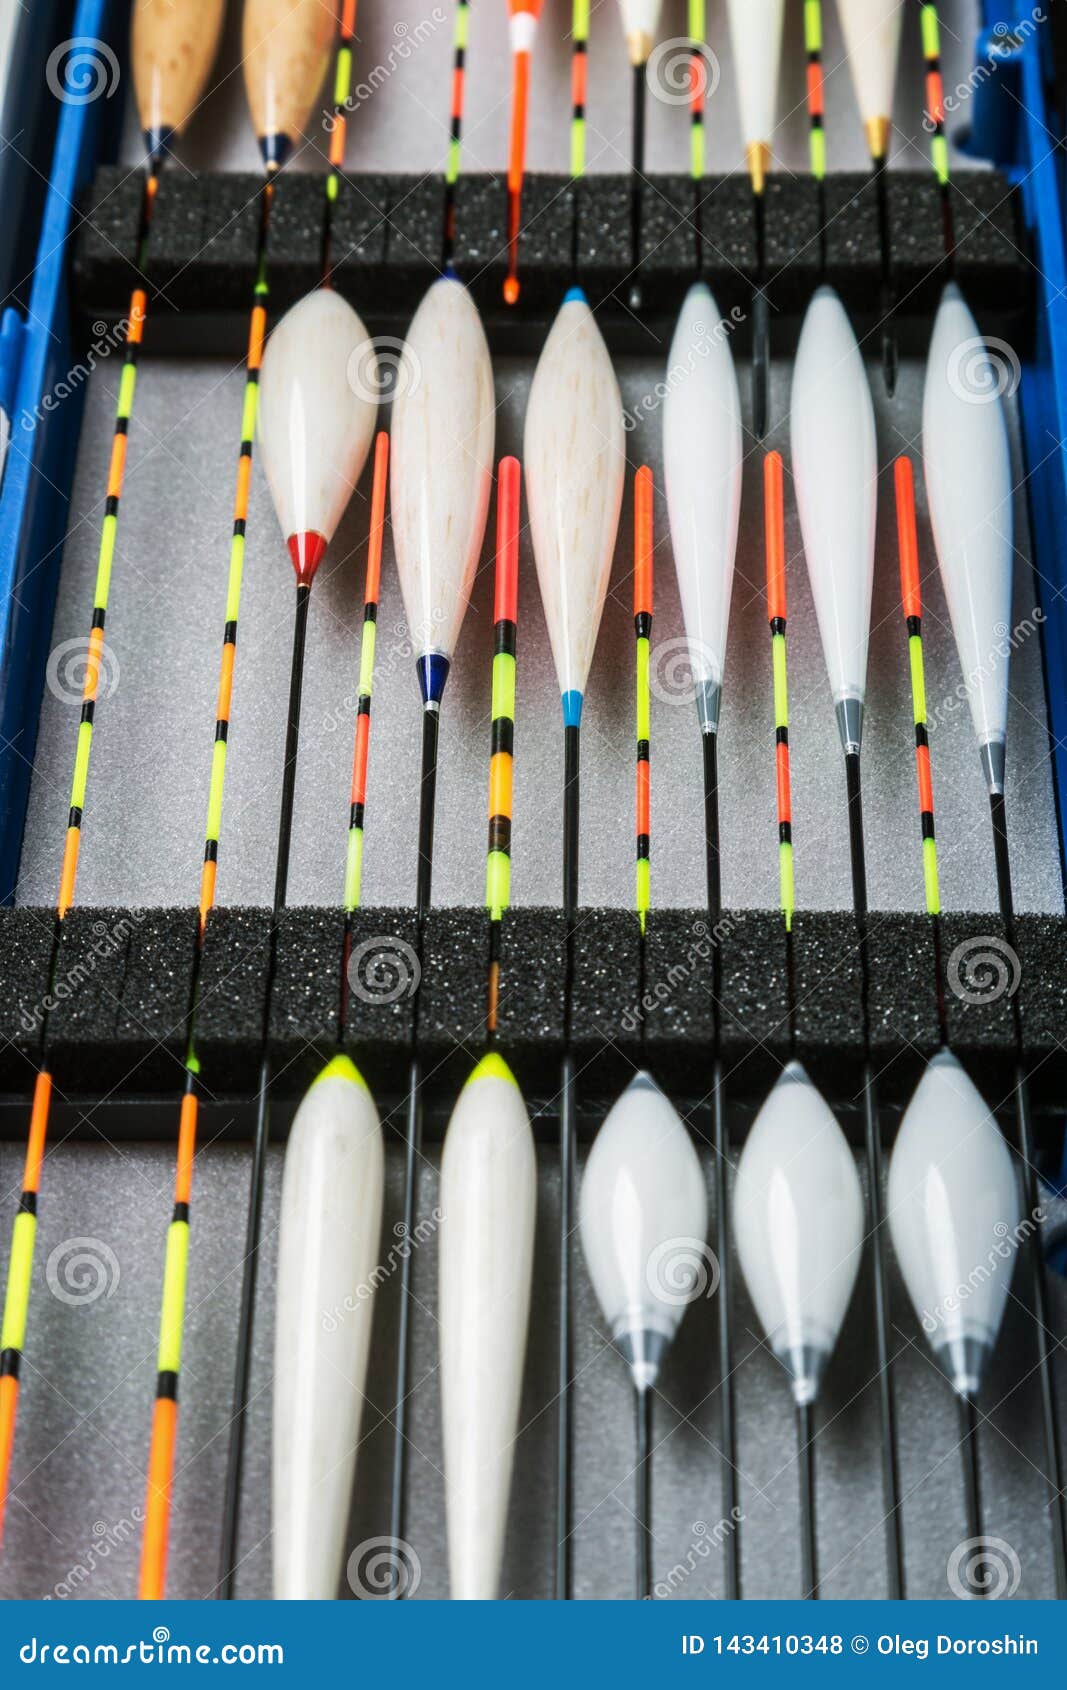 https://thumbs.dreamstime.com/z/fishing-tackle-accessories-catching-herabuna-many-different-floats-box-143410348.jpg